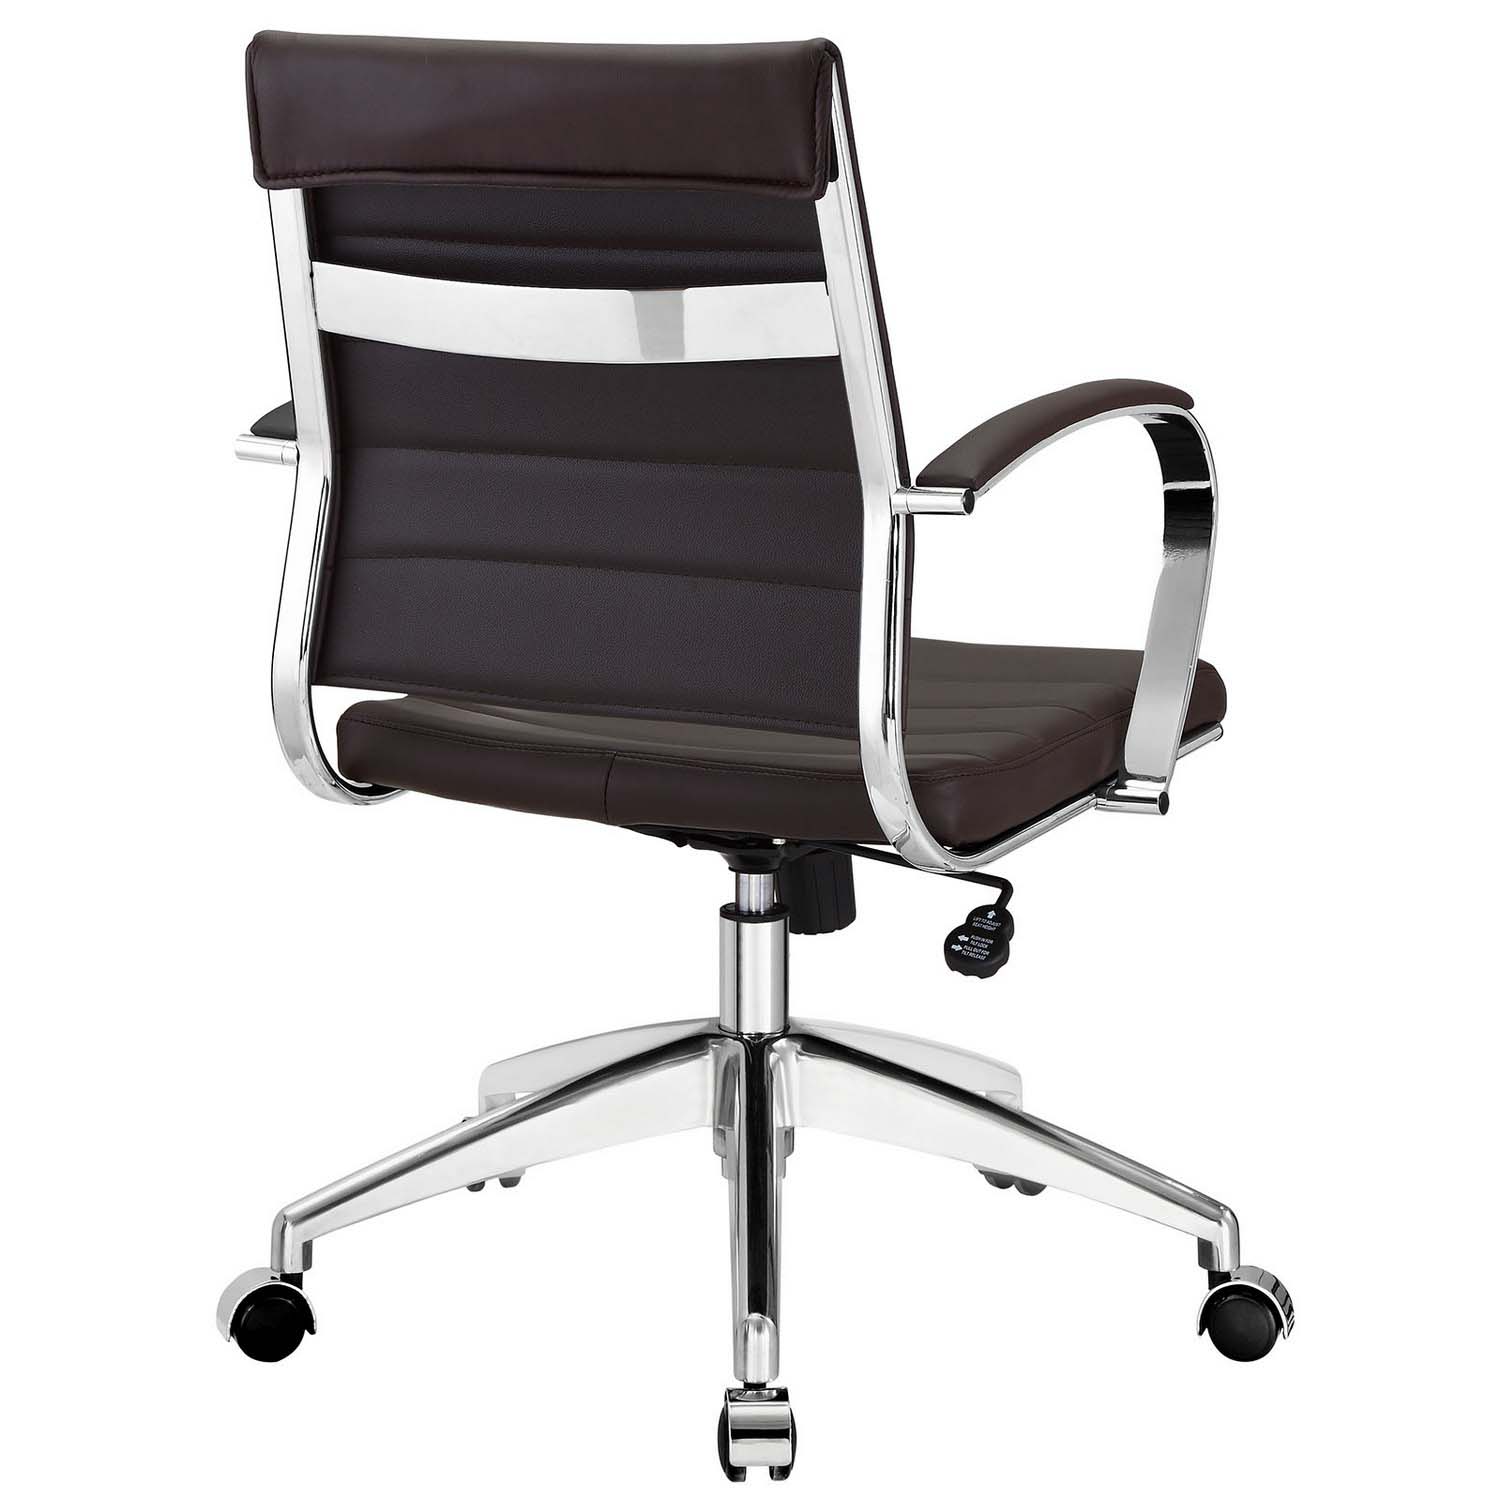 Modway Jive Mid Back Office Chair - Brown